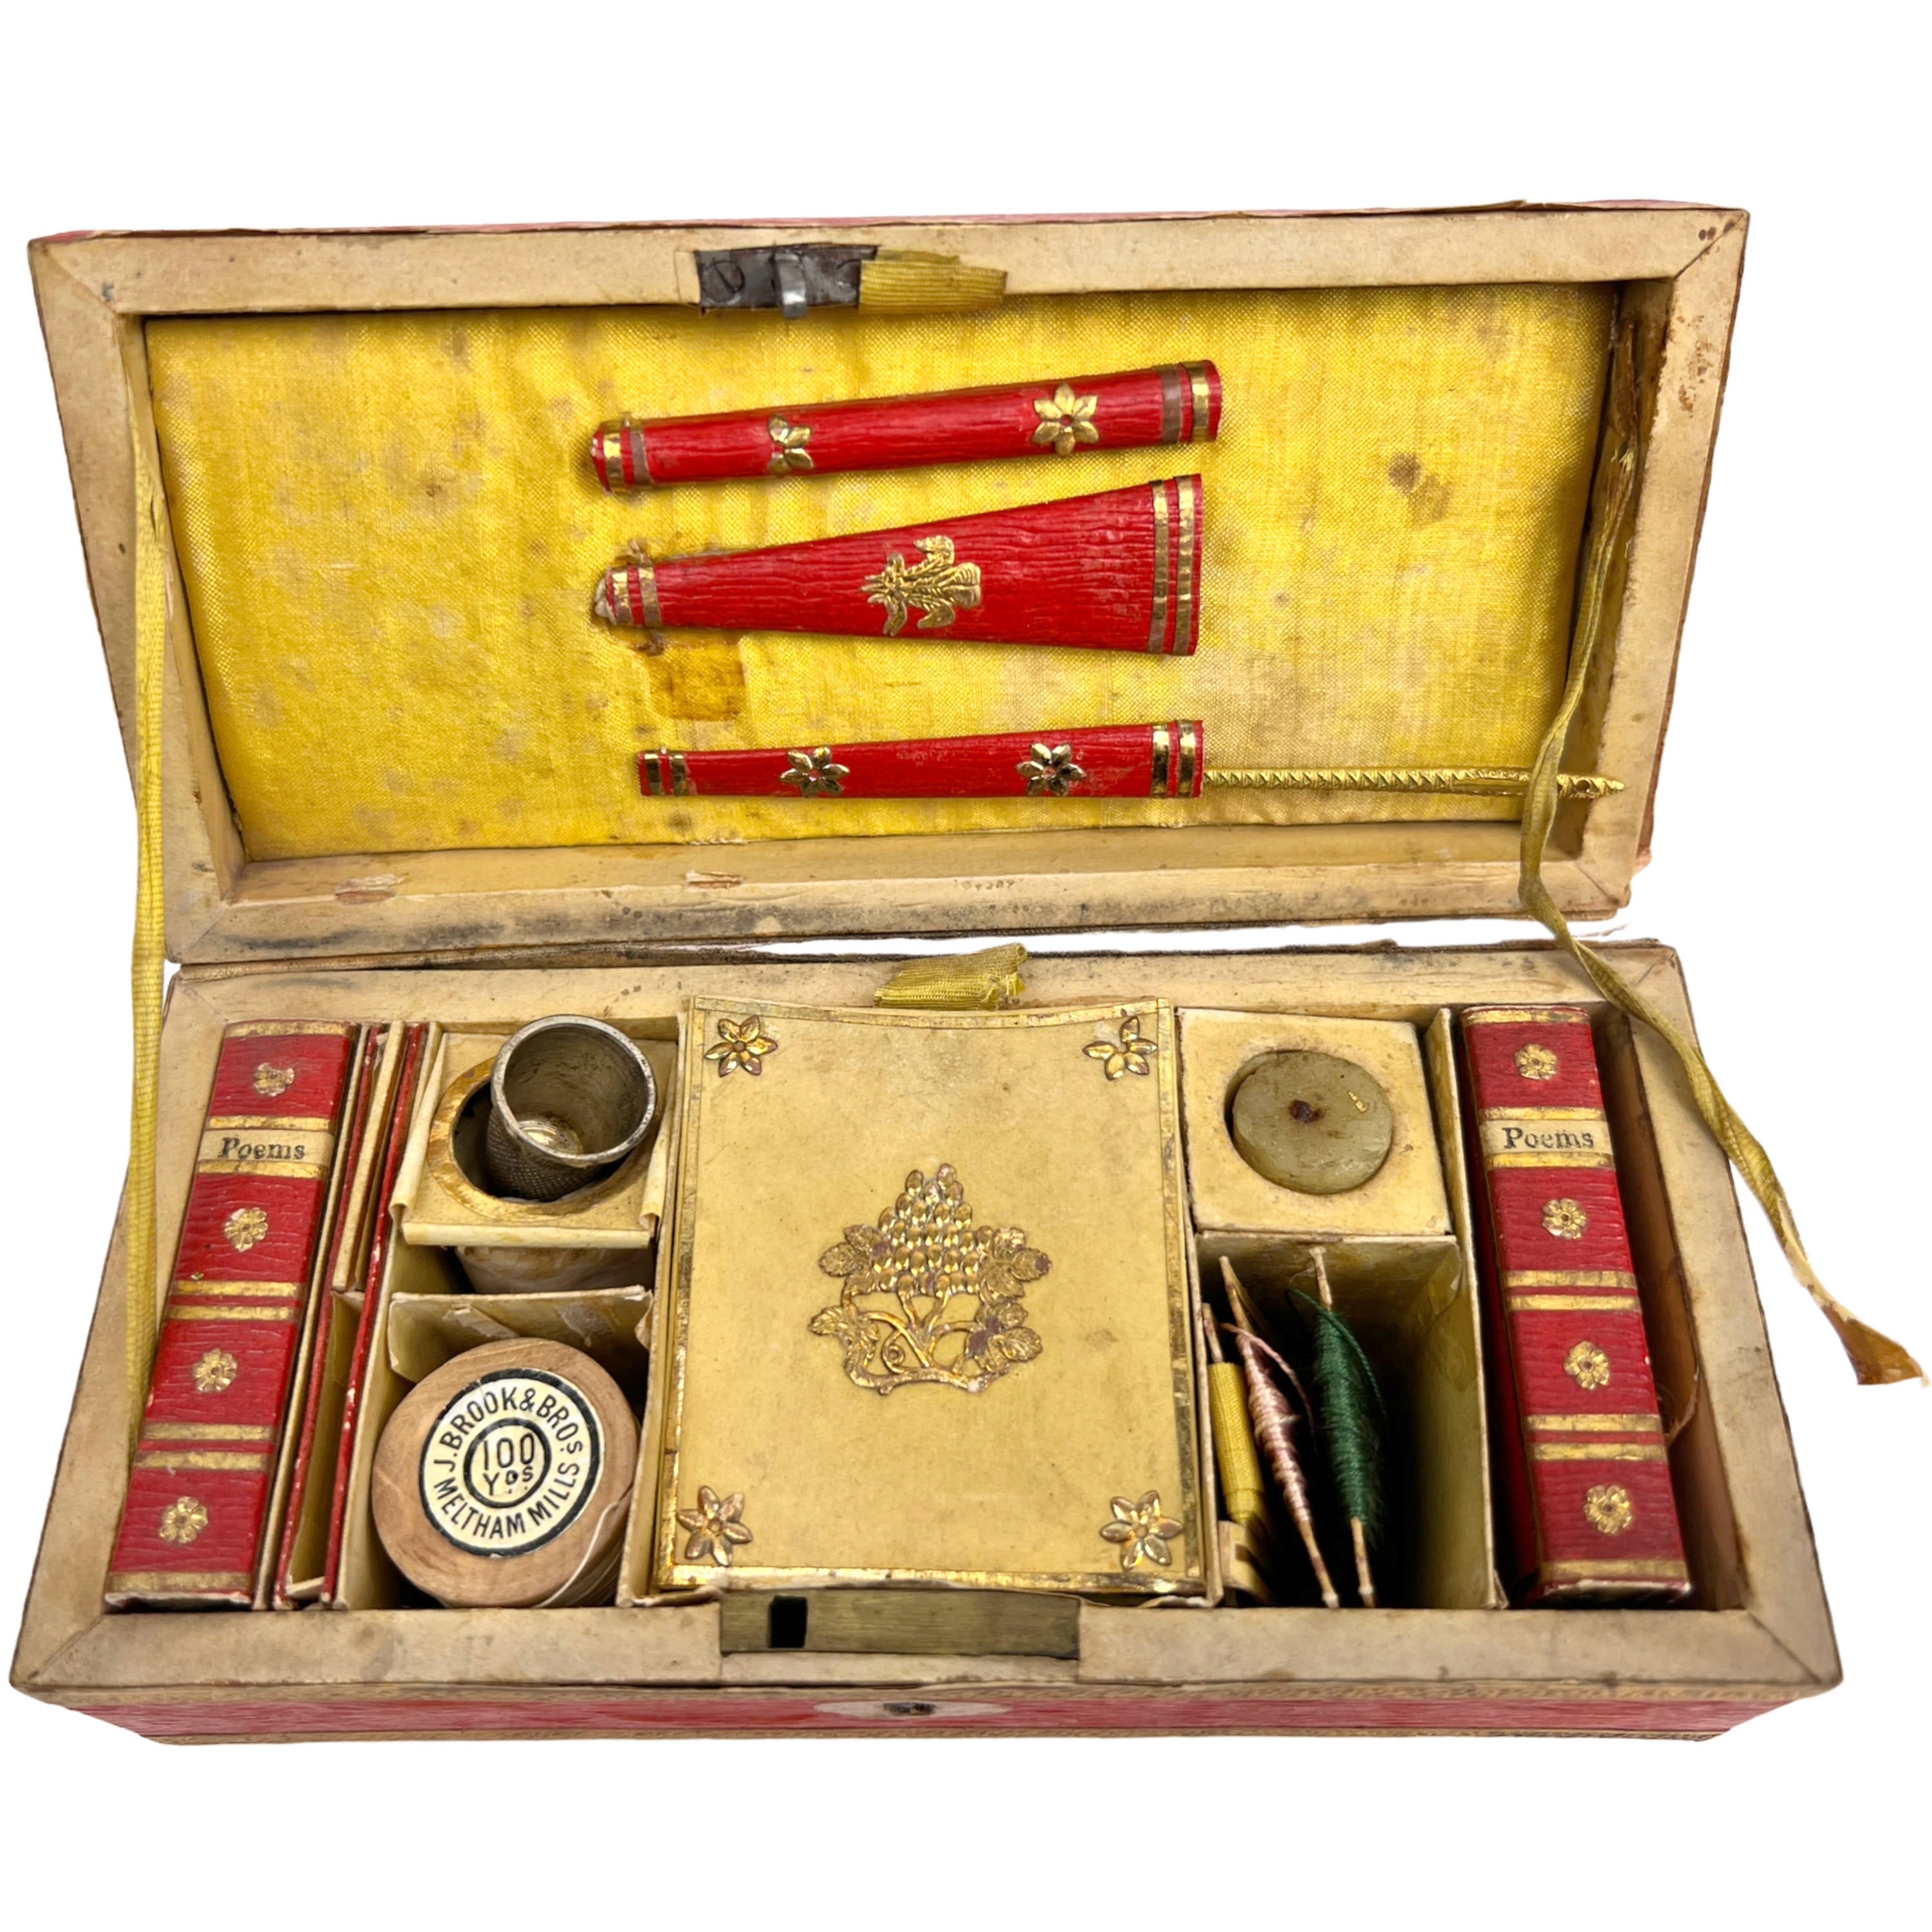 Vintage gold sewing kit with box